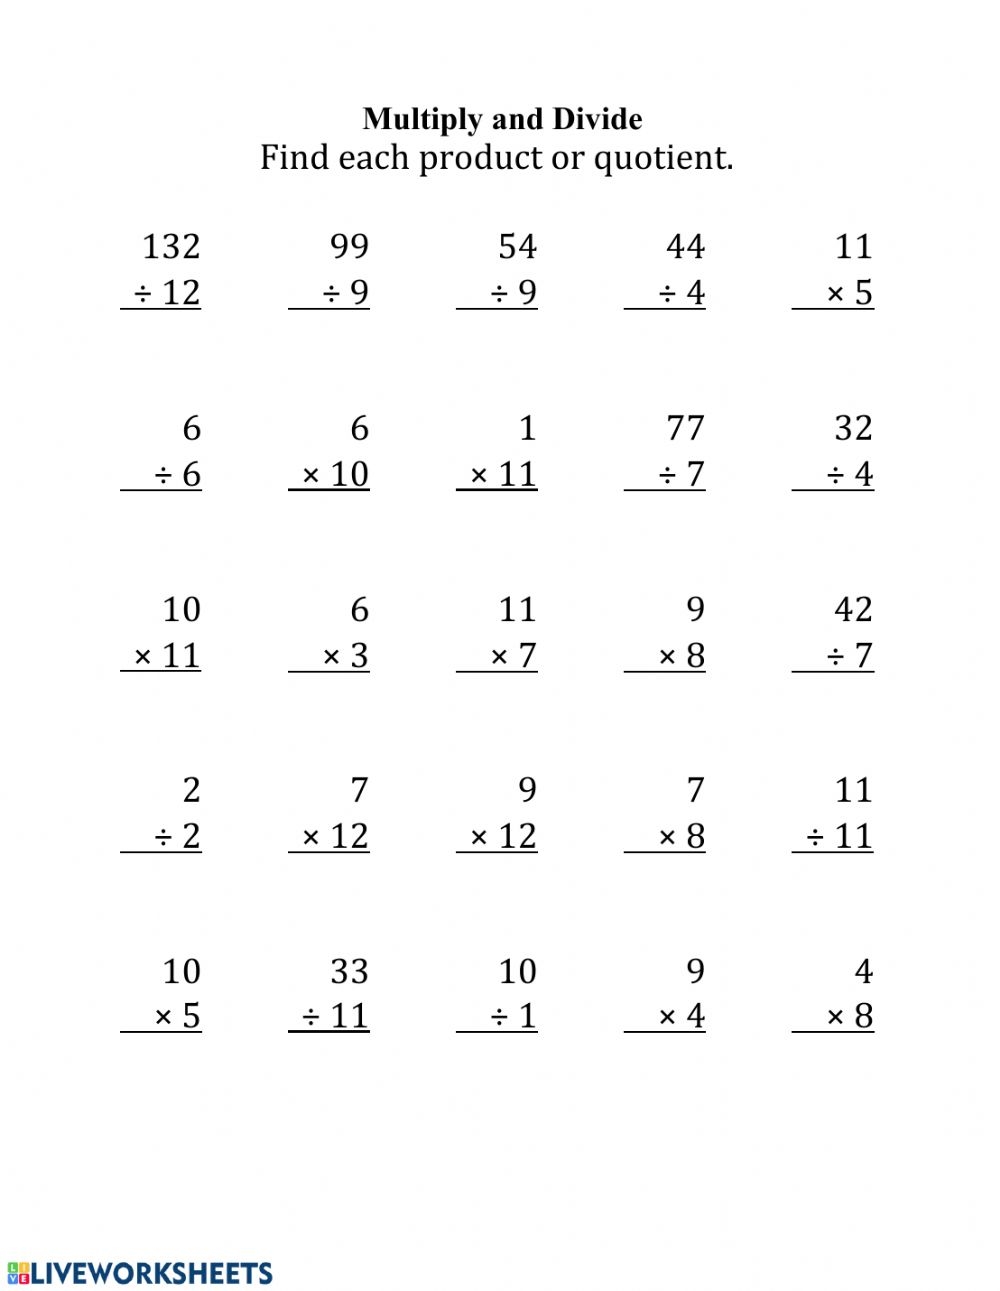 Division And Multiplication Worksheets